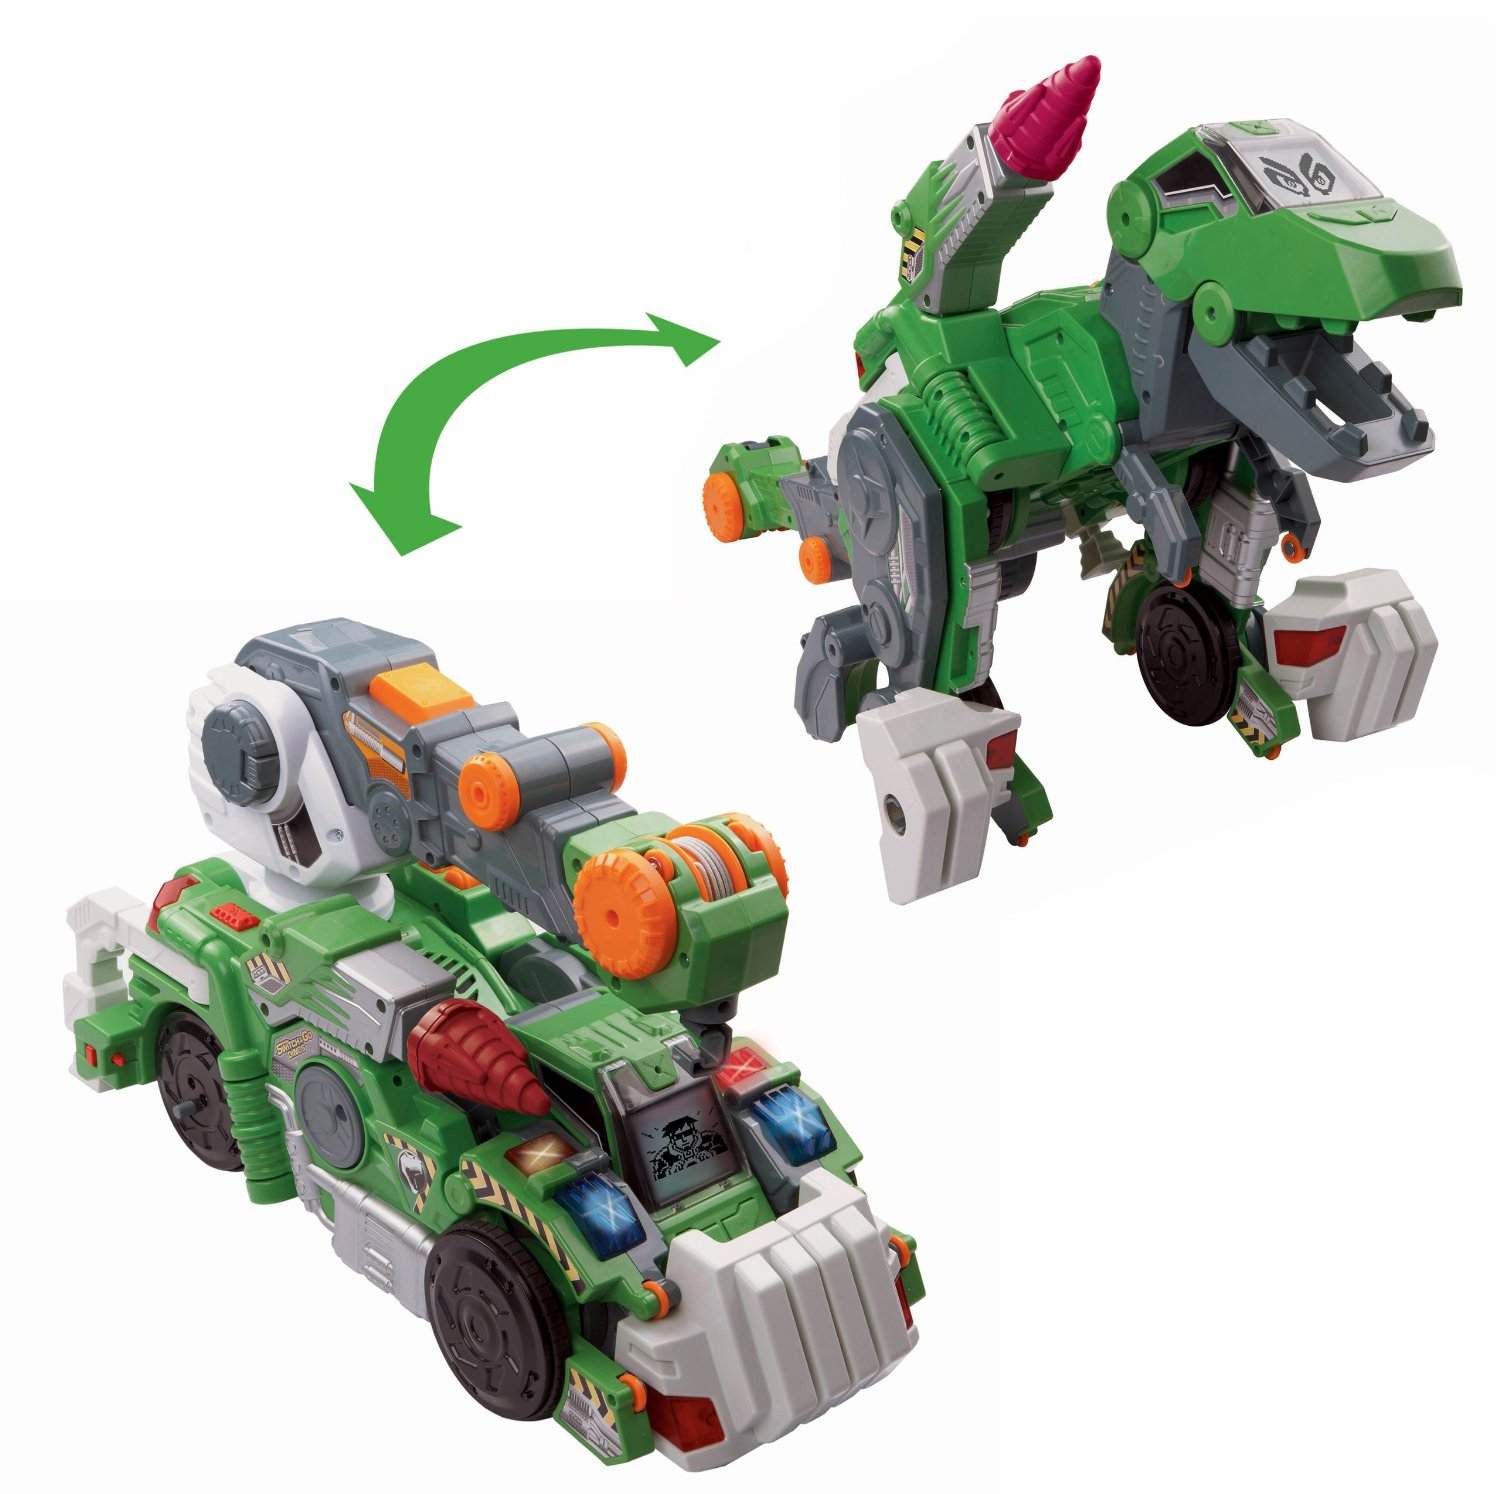  VTech Switch & Go Dinos Jagger The T-Rex Dinosaur Only $31.49 (Reg.  $69.99)! {HOT} - Couponing 101